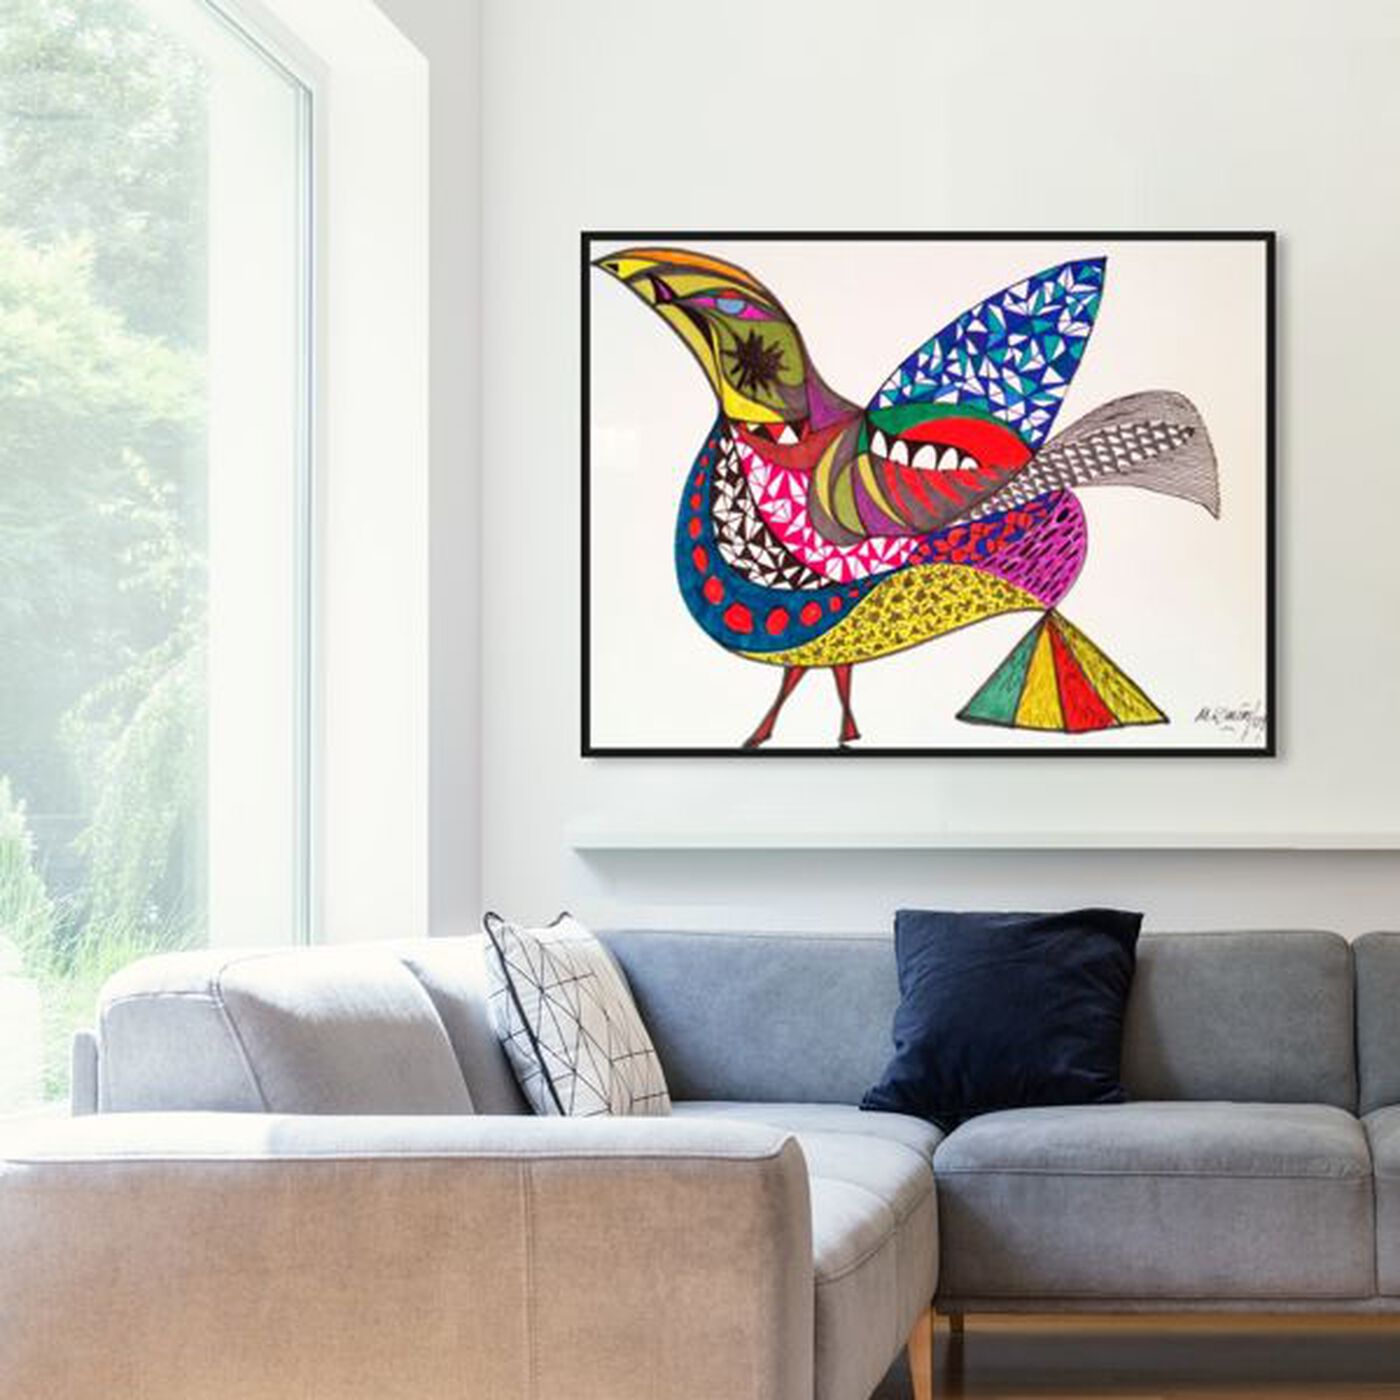 Hanging view of Bird featuring animals and birds art.